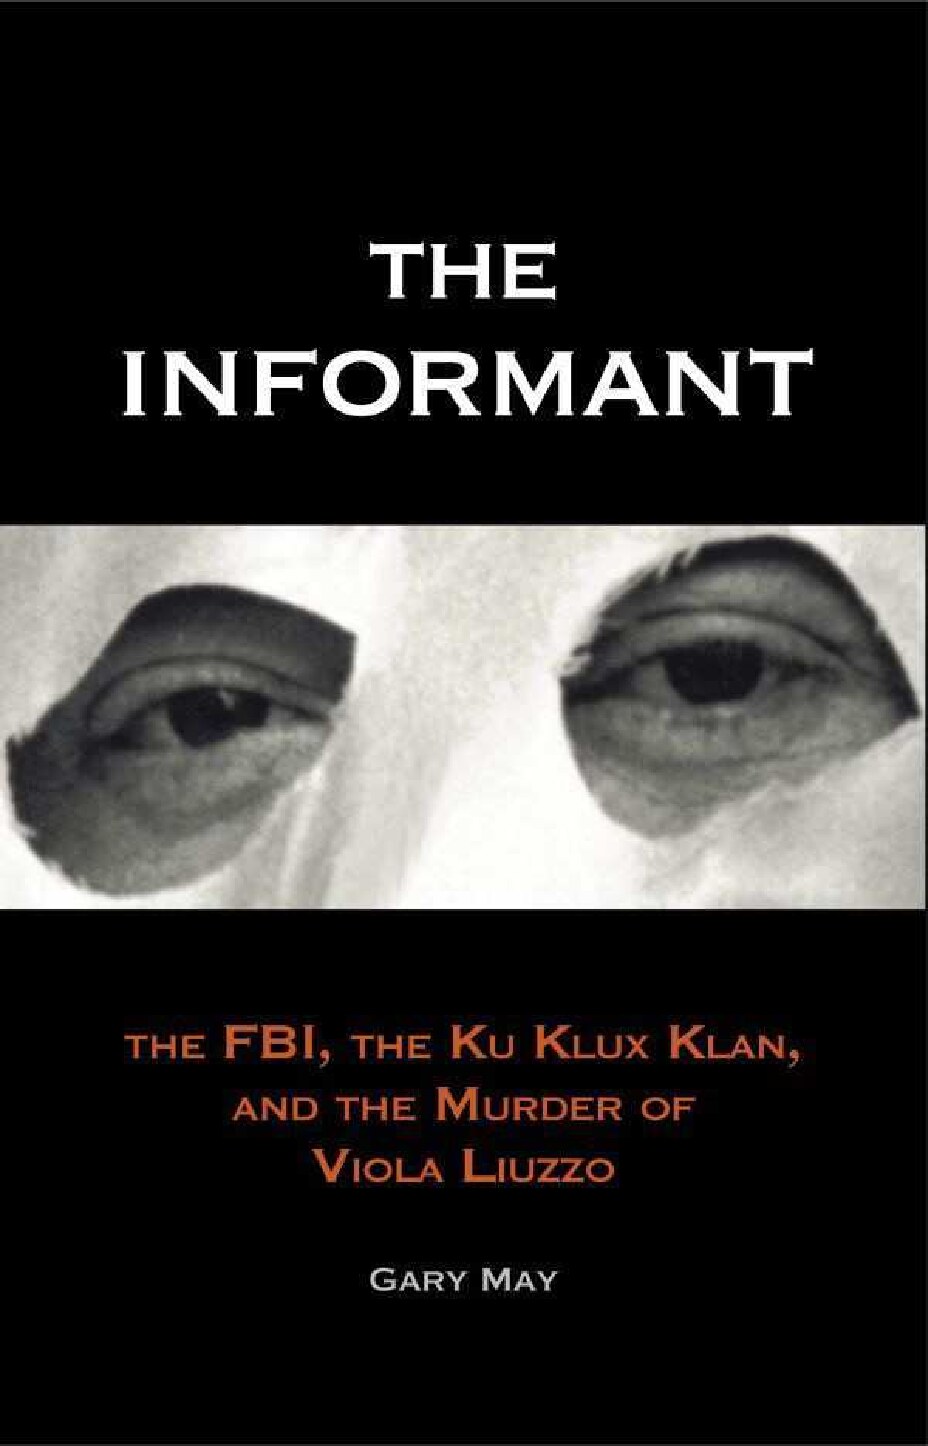 The Informant - The FBI, the Ku Klux Klan, and the Murder of Viola Liuzzo